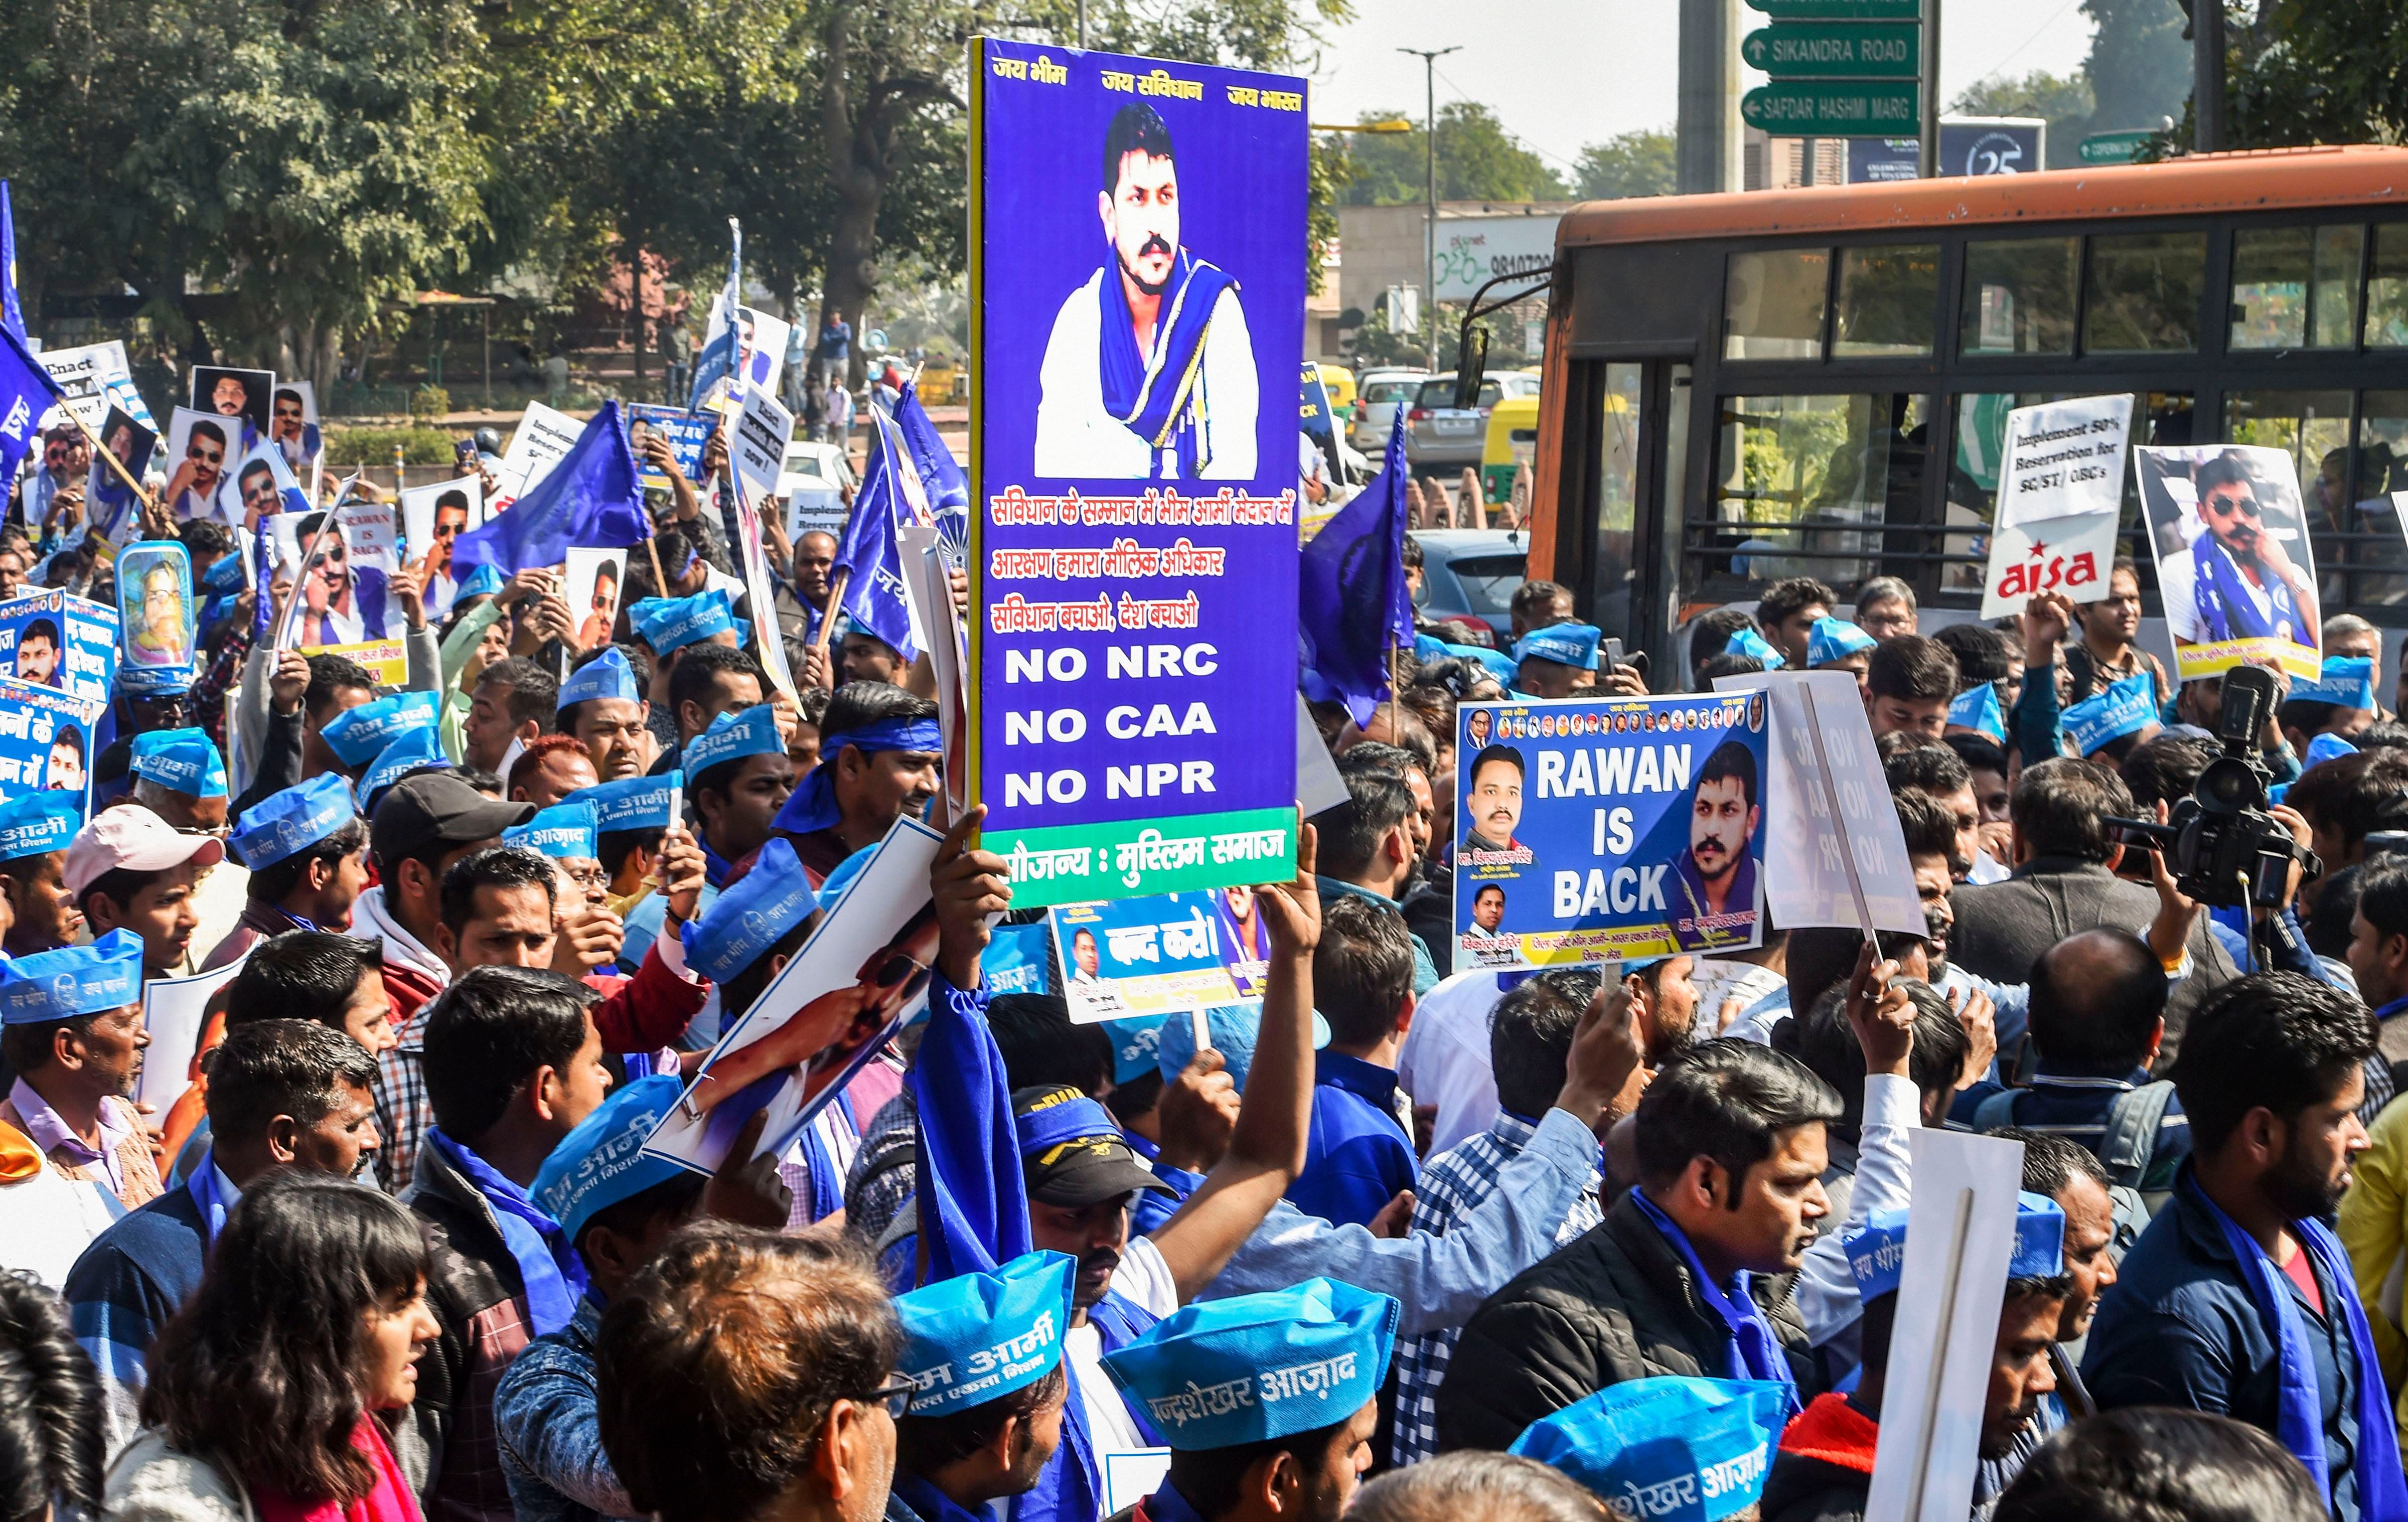 Supporters of Bhim Army chief Chandra Shekhar Aazad during a protest. (PTI Photo)